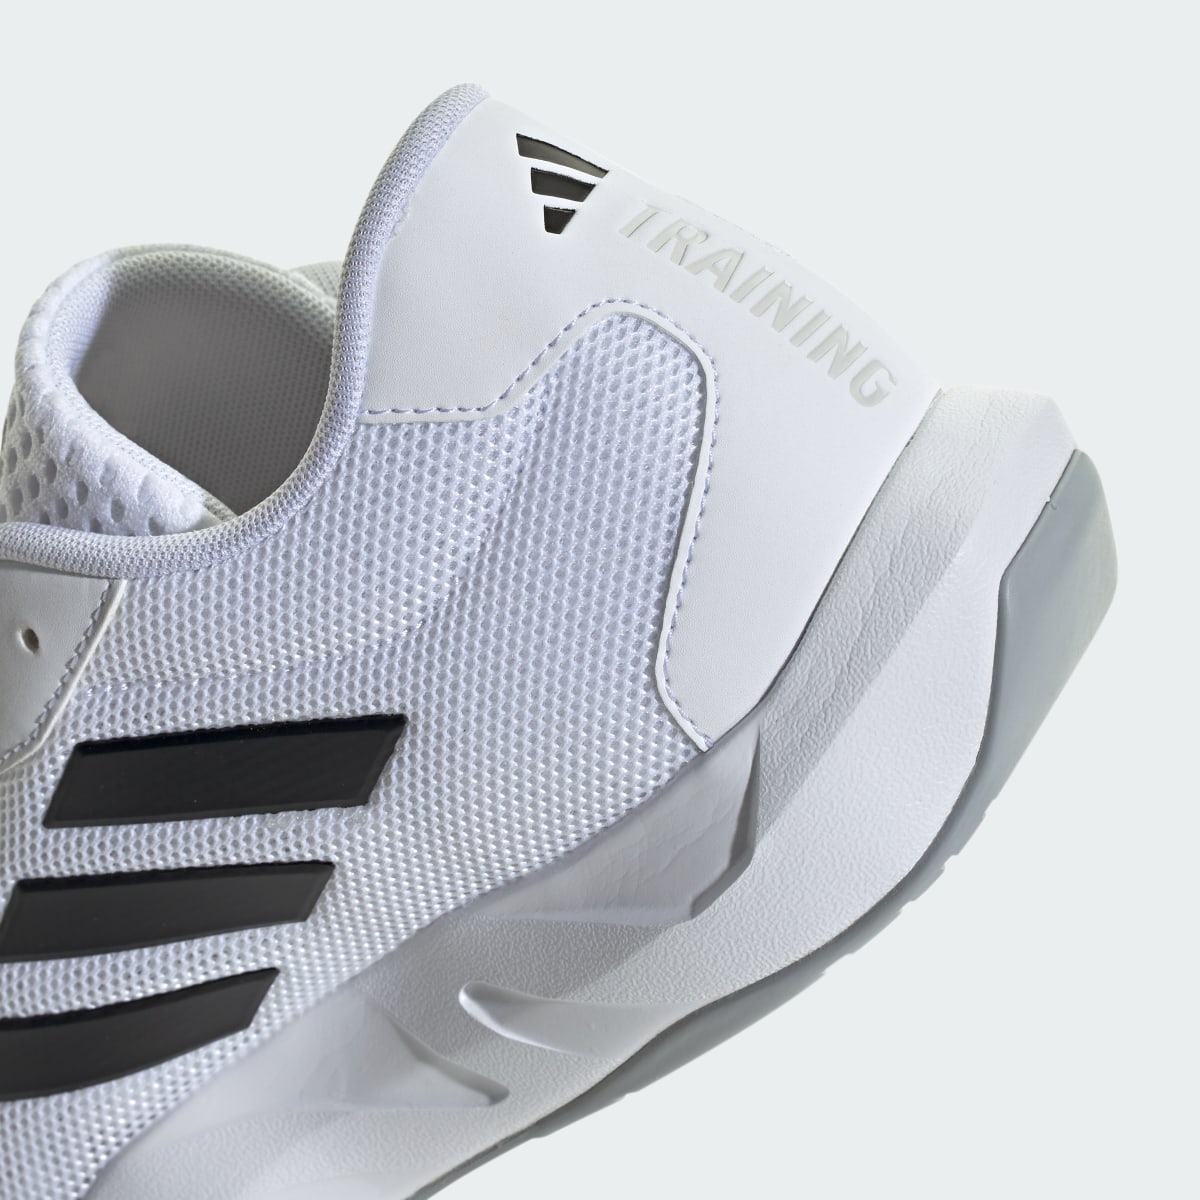 Adidas Amplimove Trainer Shoes. 10